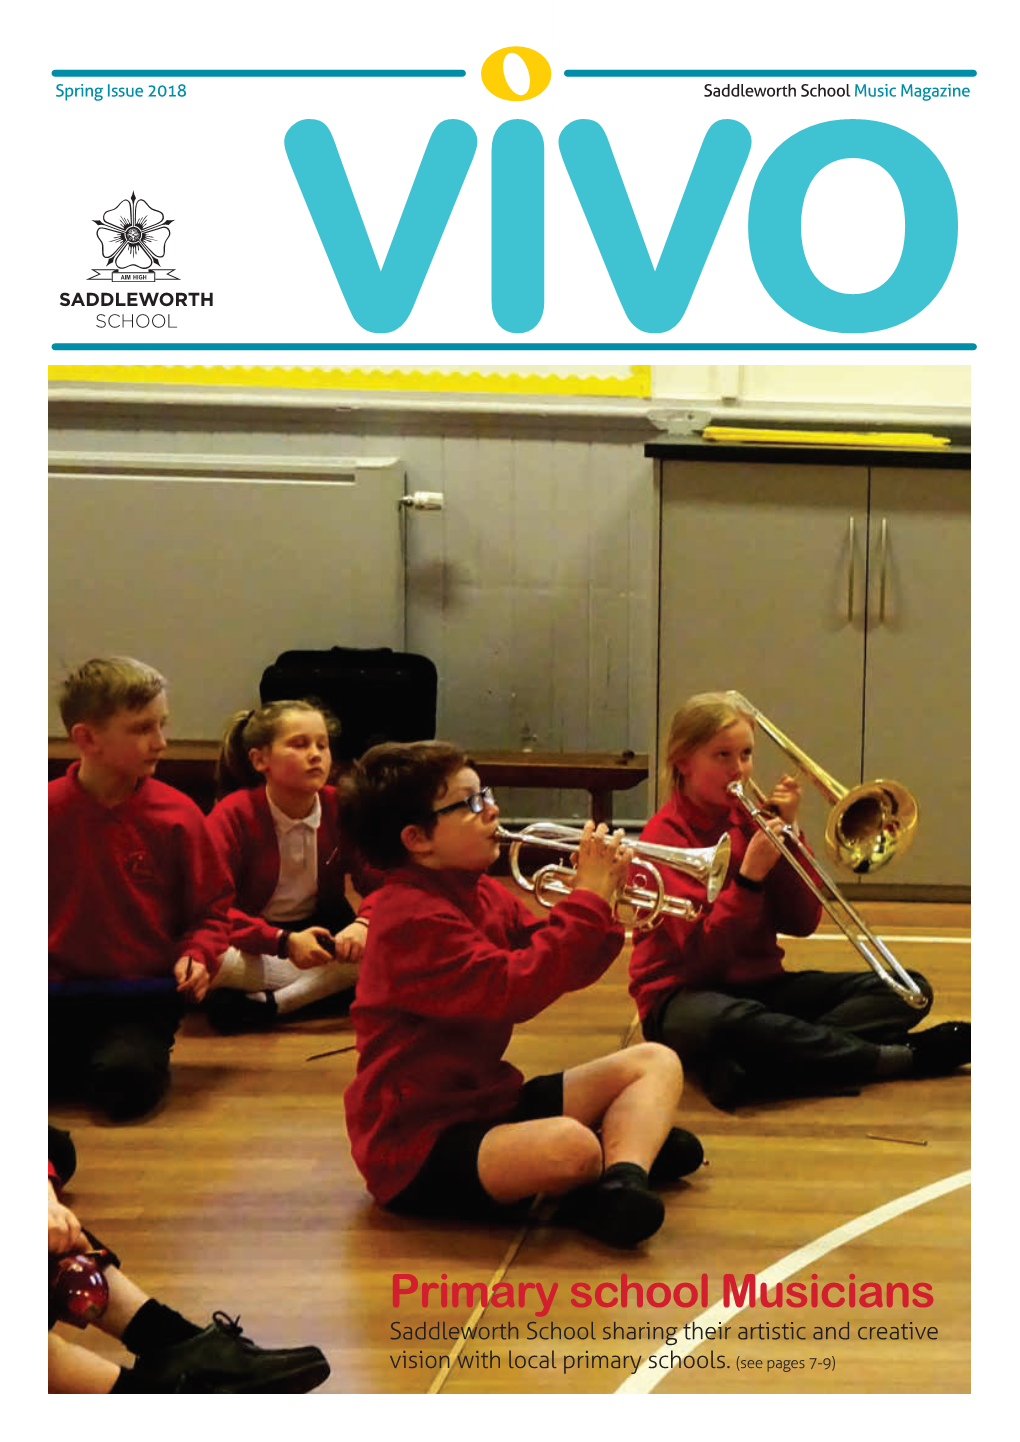 Primary School Musicians Saddleworth School Sharing Their Artistic and Creative Vision with Local Primary Schools